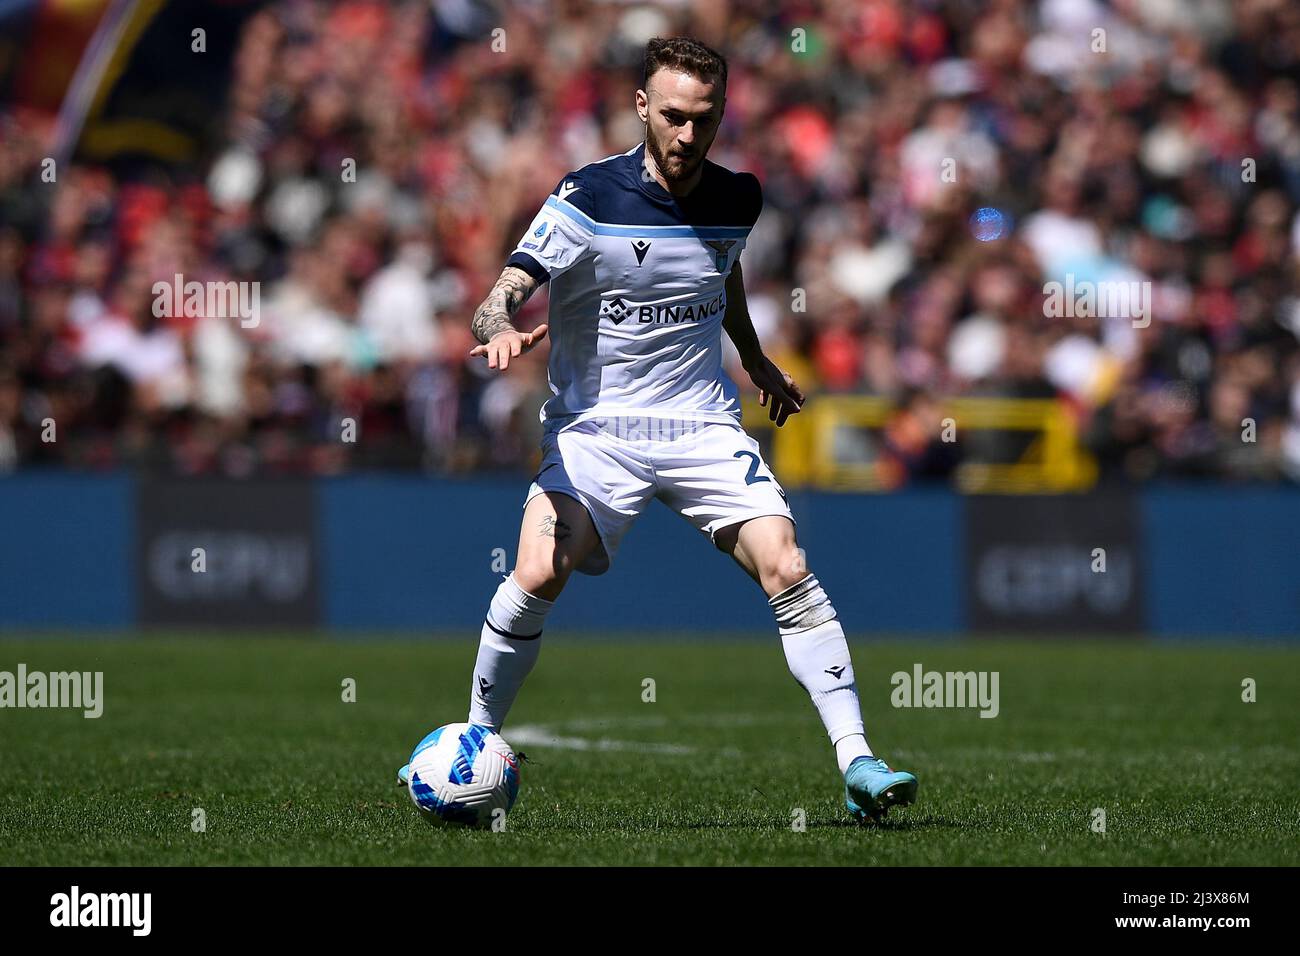 Genoa, Italy. 10 April 2022. Manuel Lazzari of SS Lazio in action during  the Serie A football match between Genoa CFC and SS Lazio. Credit: Nicolò  Campo/Alamy Live News Stock Photo - Alamy